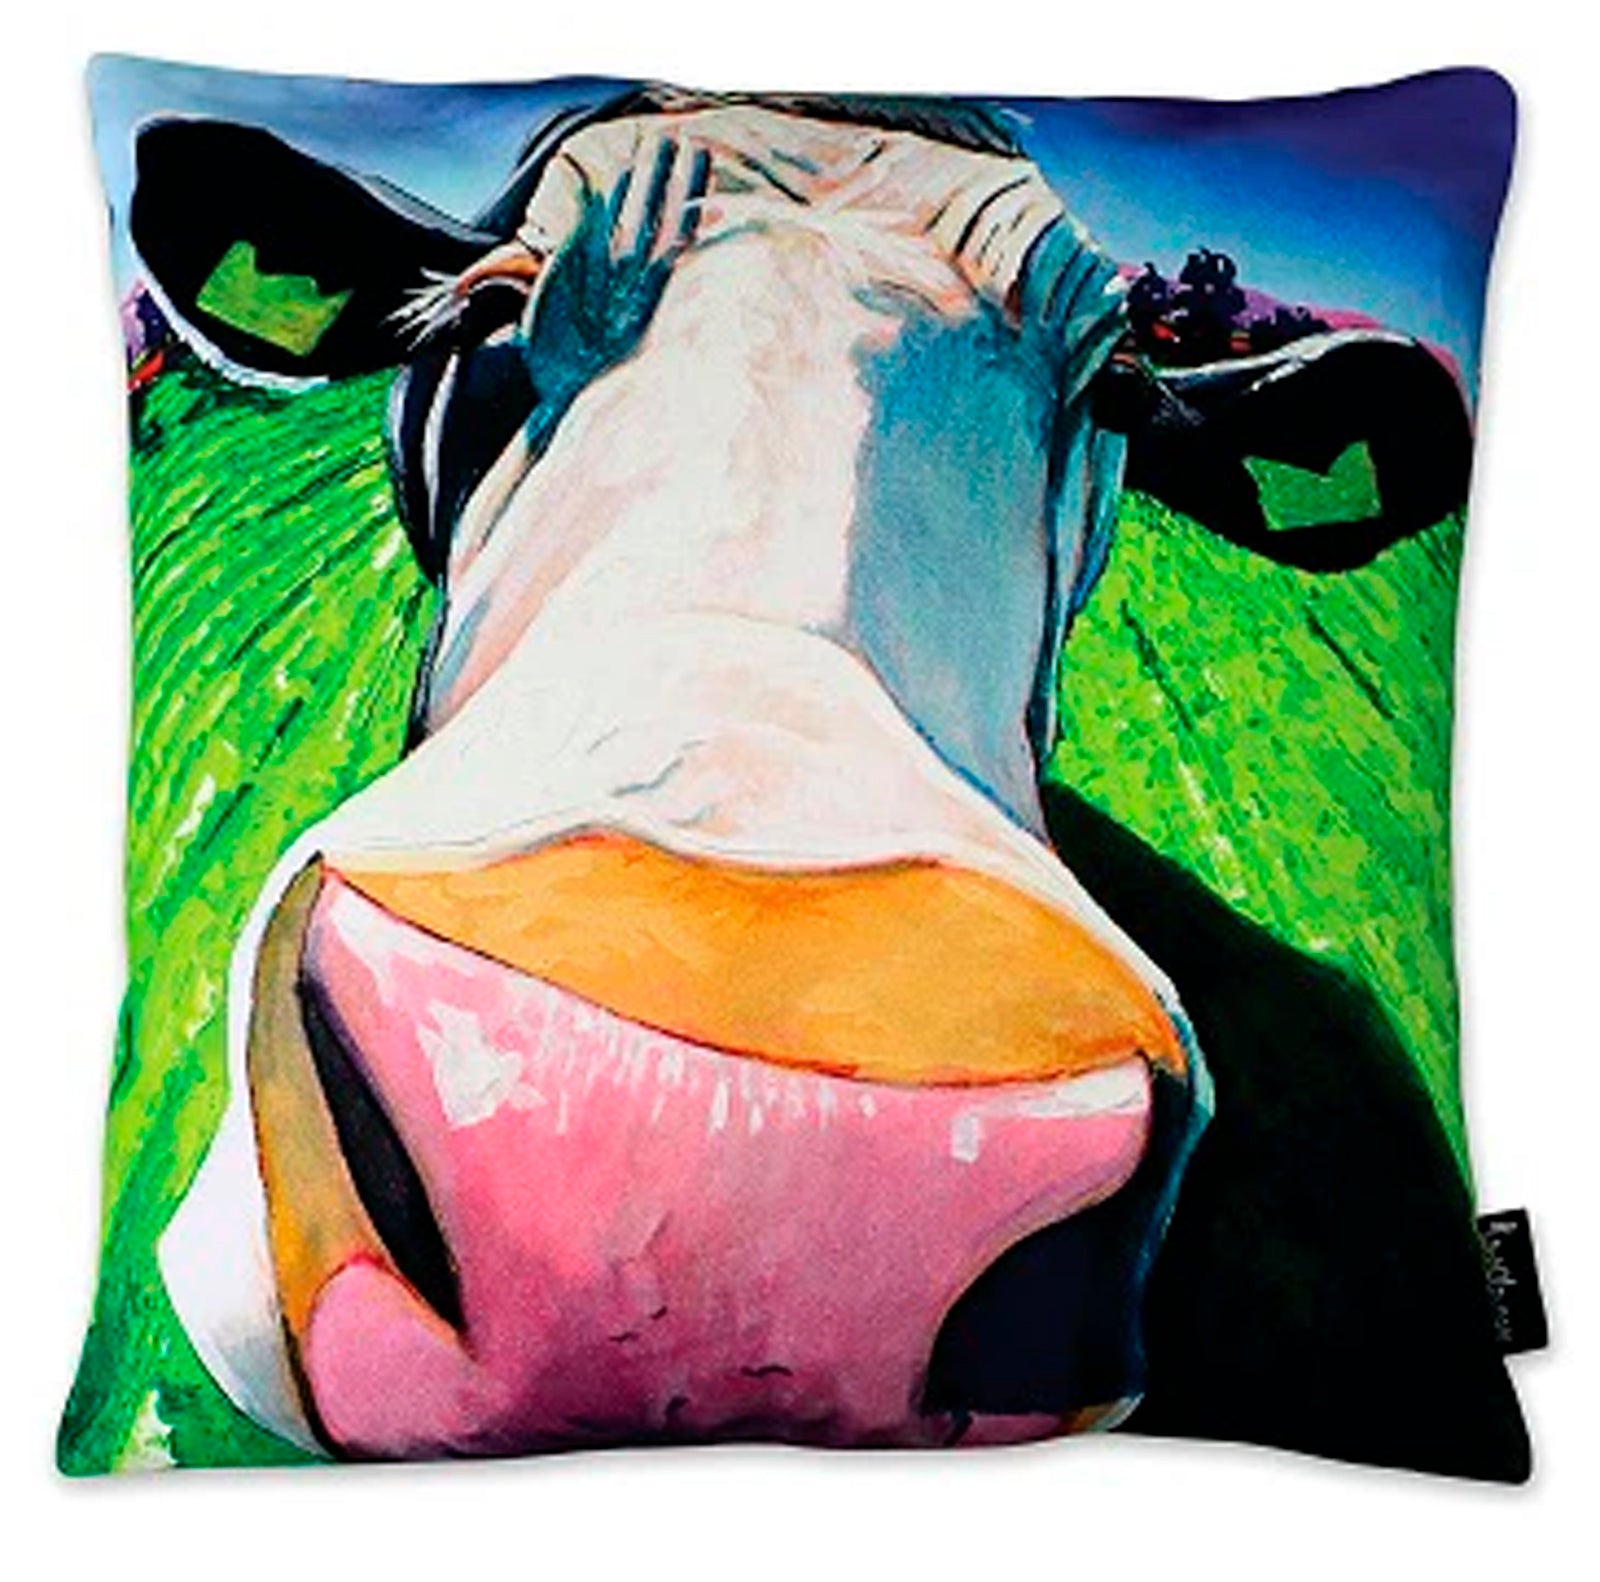 The moover and shaker 45cm x 45cm Luxury cushion